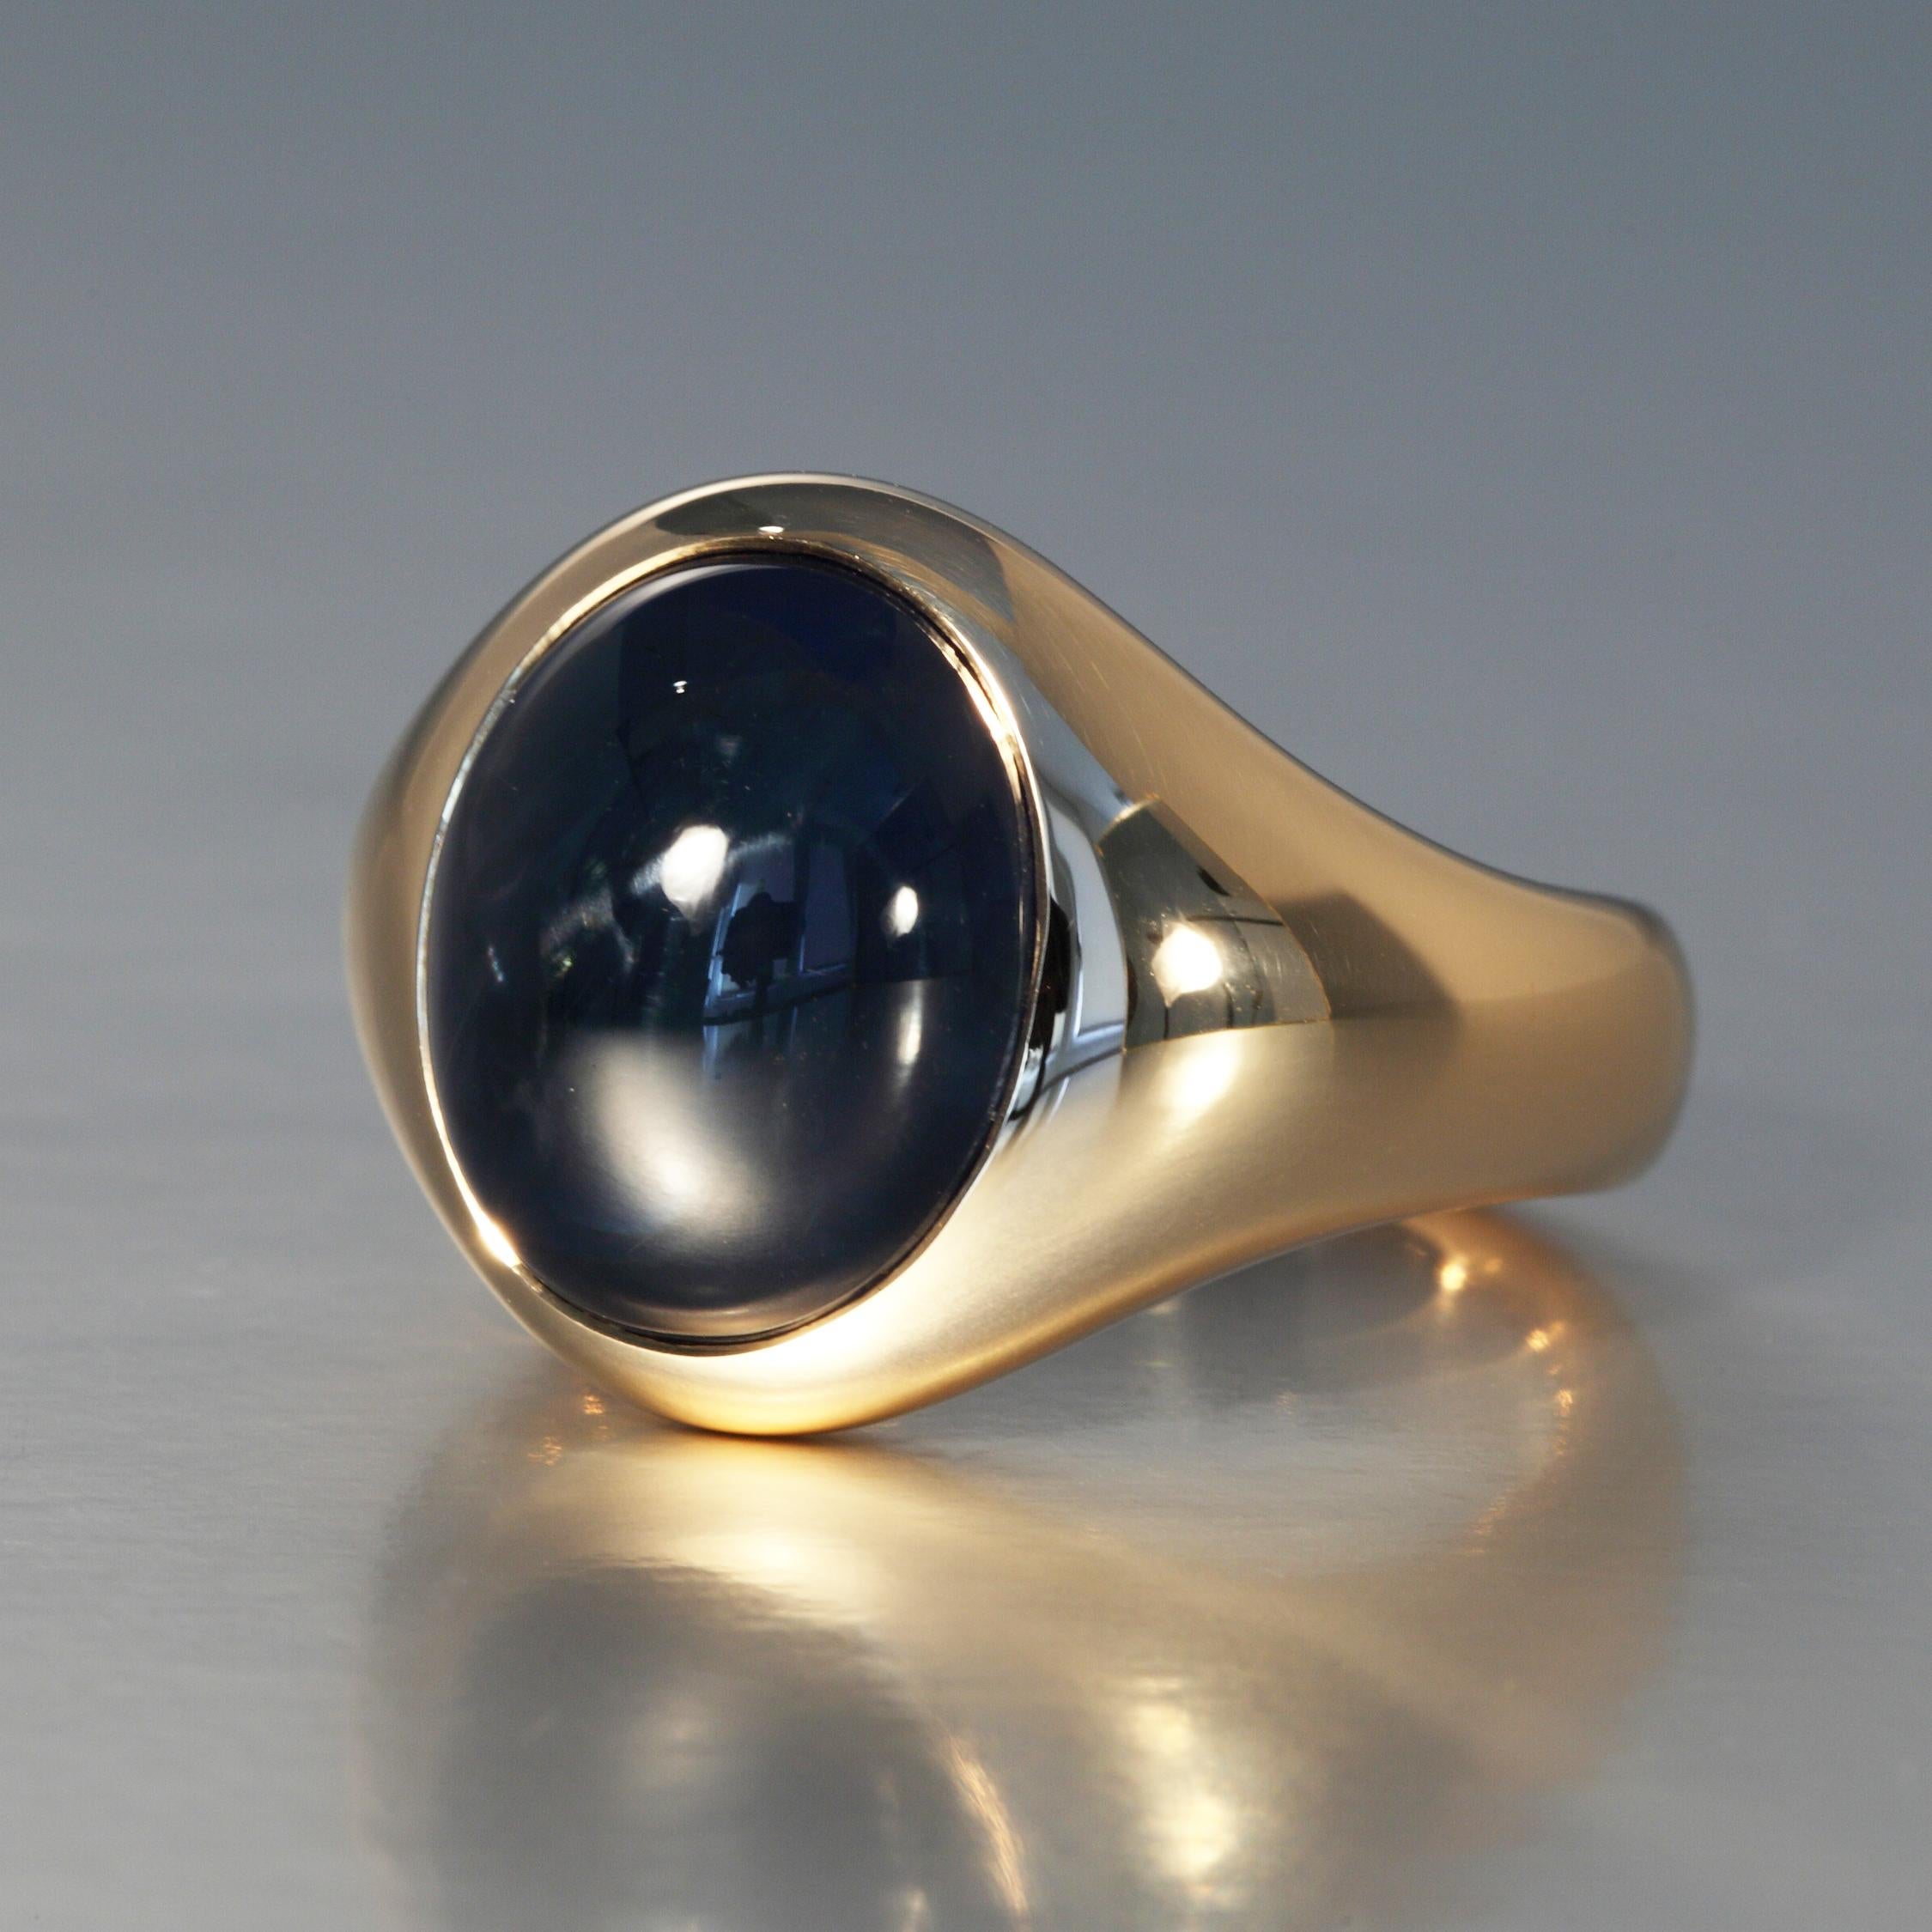 The 13.22 carat oval cabochon cut blue sapphire is mounted in a rose gold ring. This one of a kind piece is designed and hand made (lost wax method) in Zurich, Switzerland by Robert Vogelsang and signed RV.

It is set in 18 Karat rose gold and